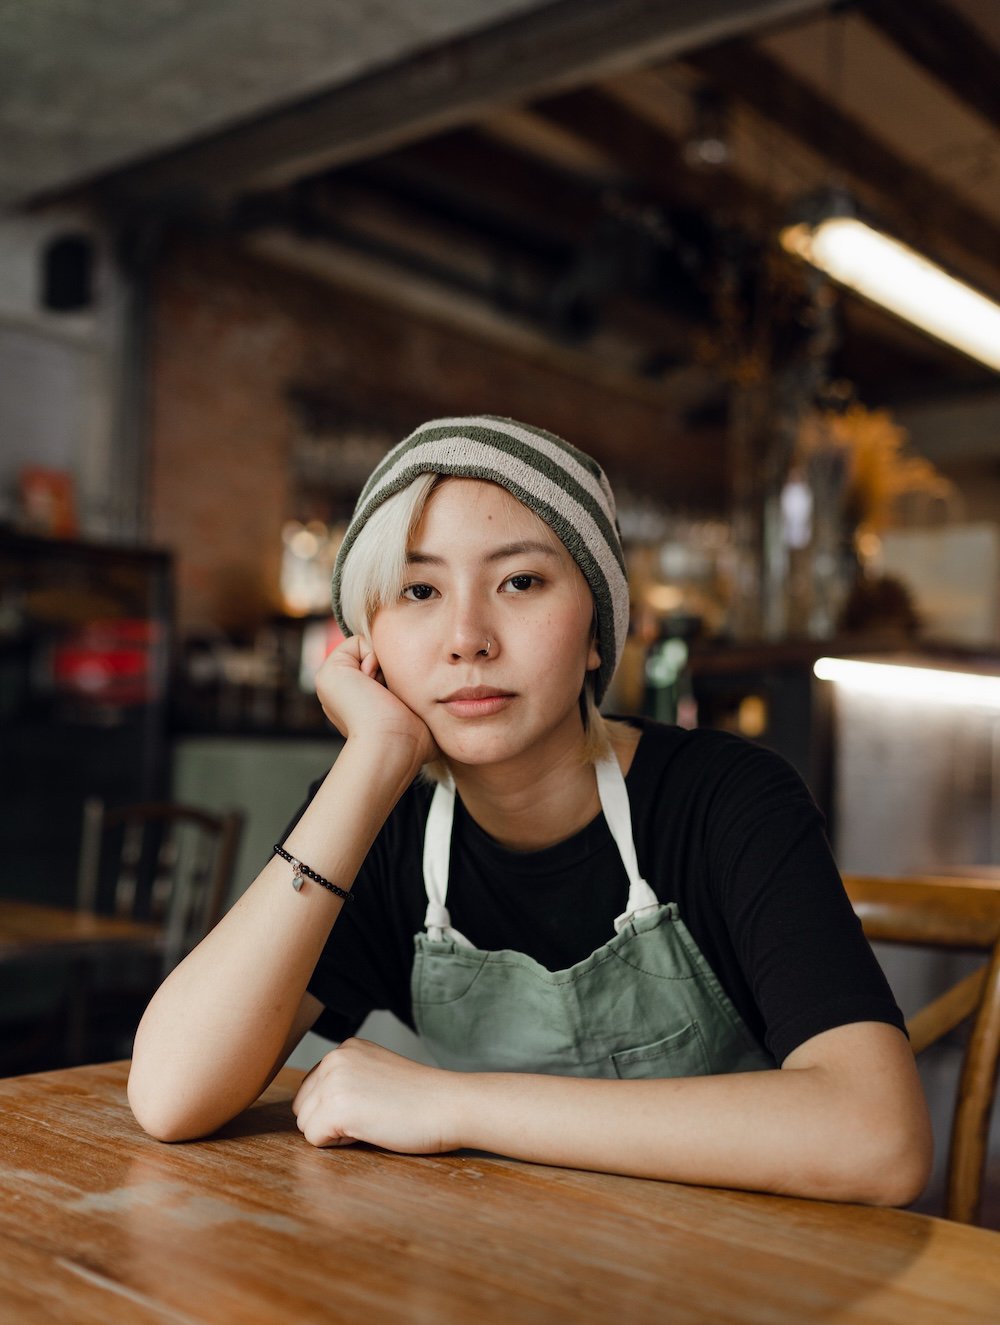 A woman in an apron in a café, staring at the camera